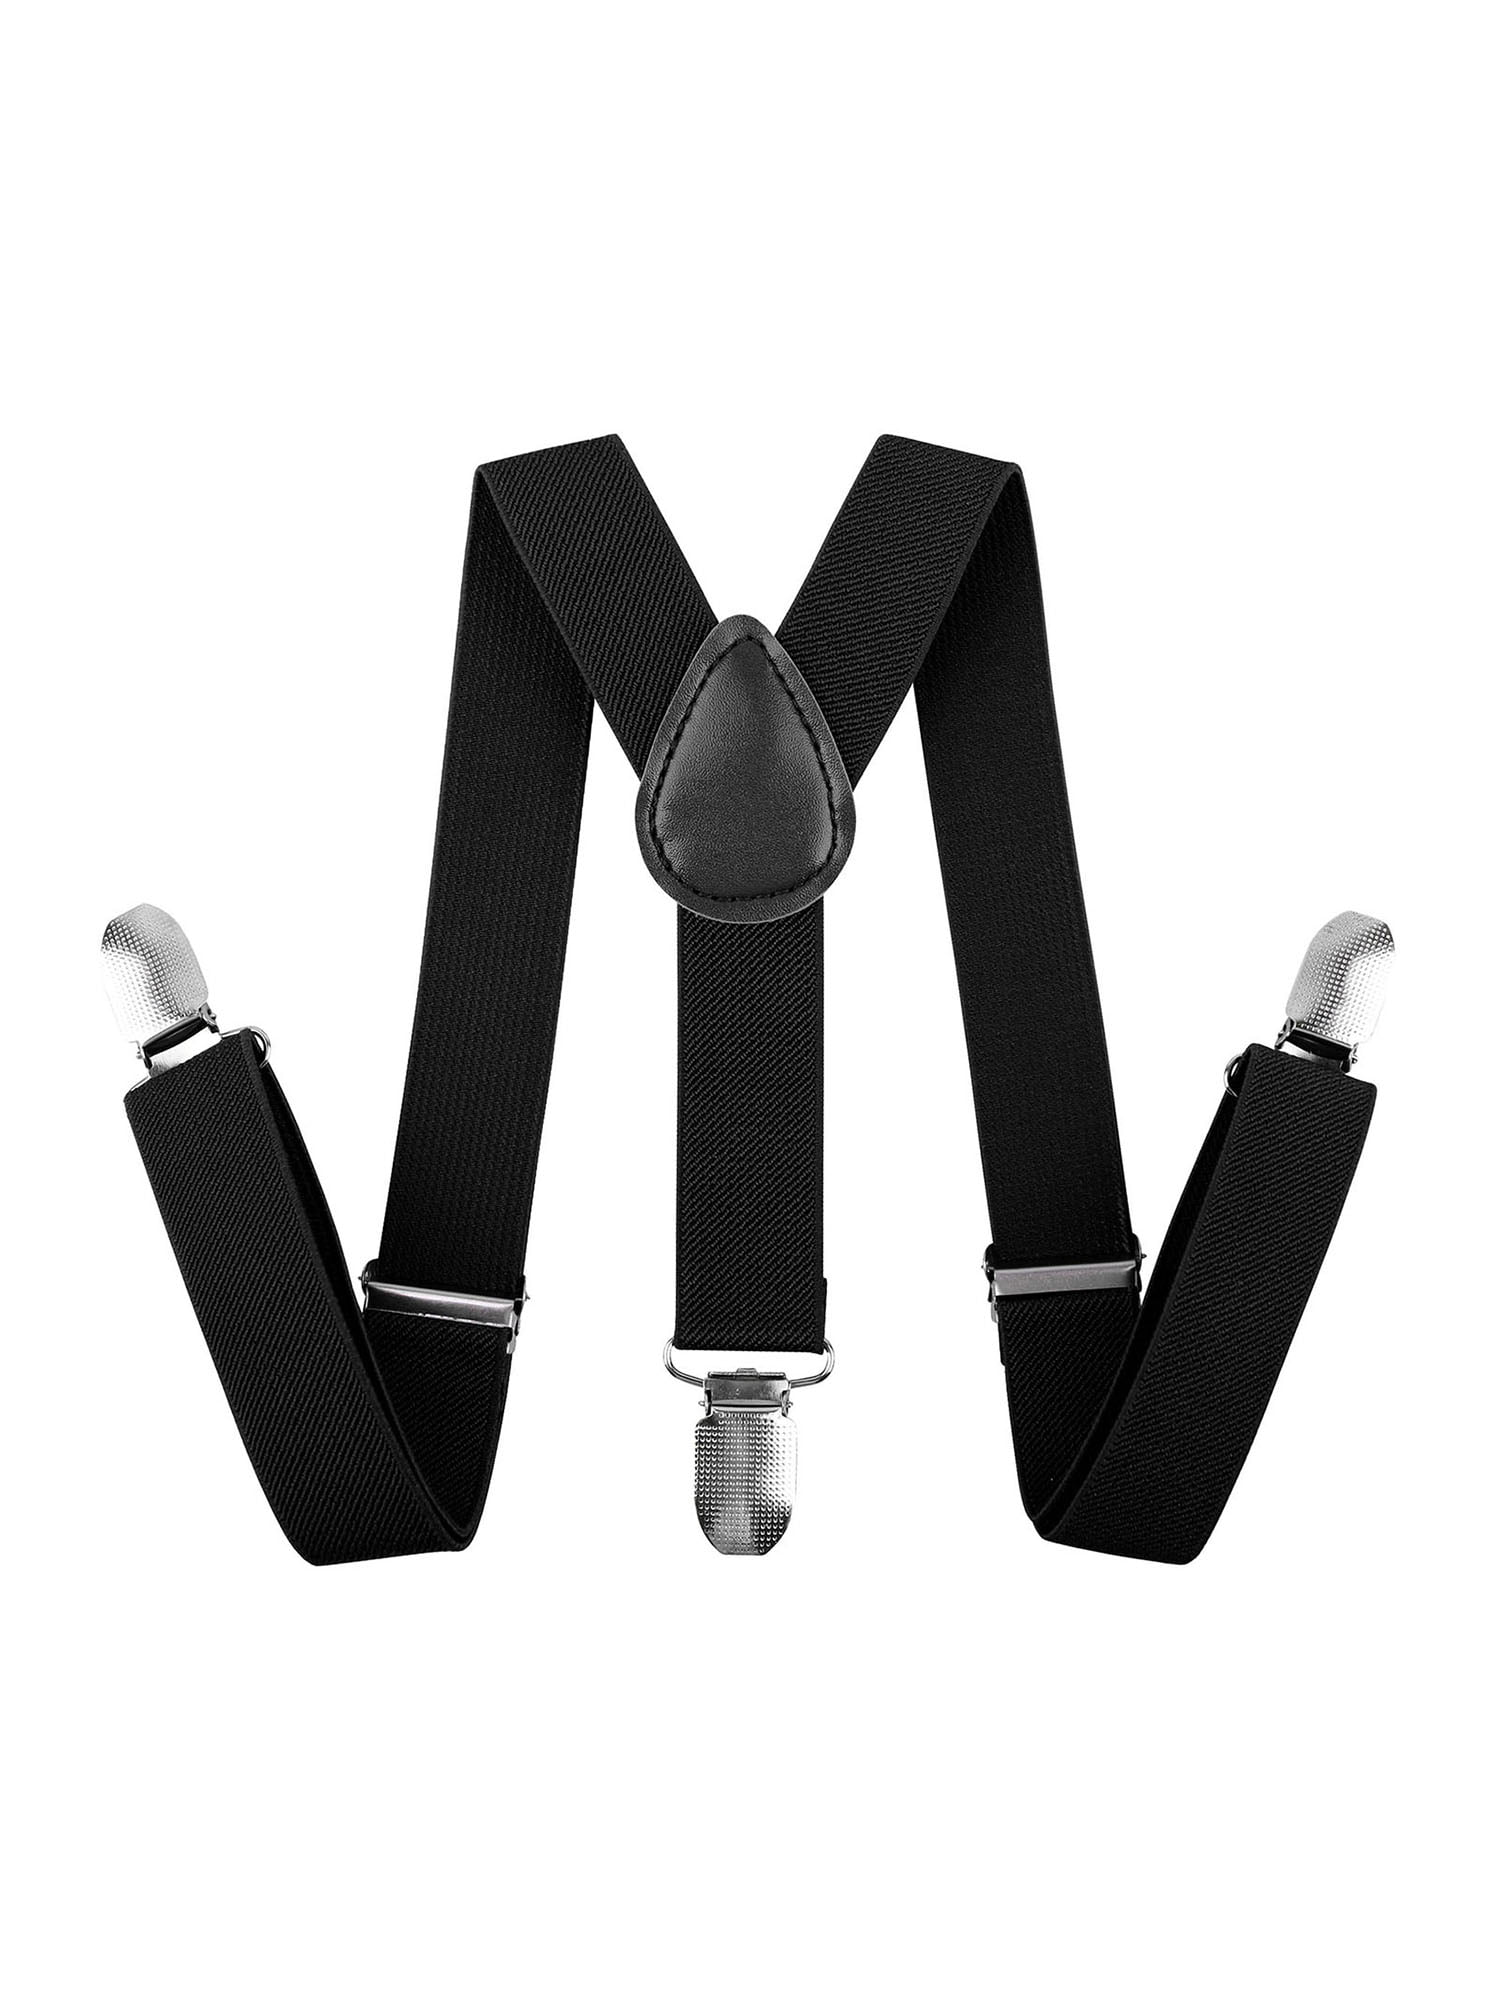 Buyless Fashion Kids And Baby 1 Elastic Adjustable Trouser Y Back Suspenders Braces With Strong Heavy Duty Clips 